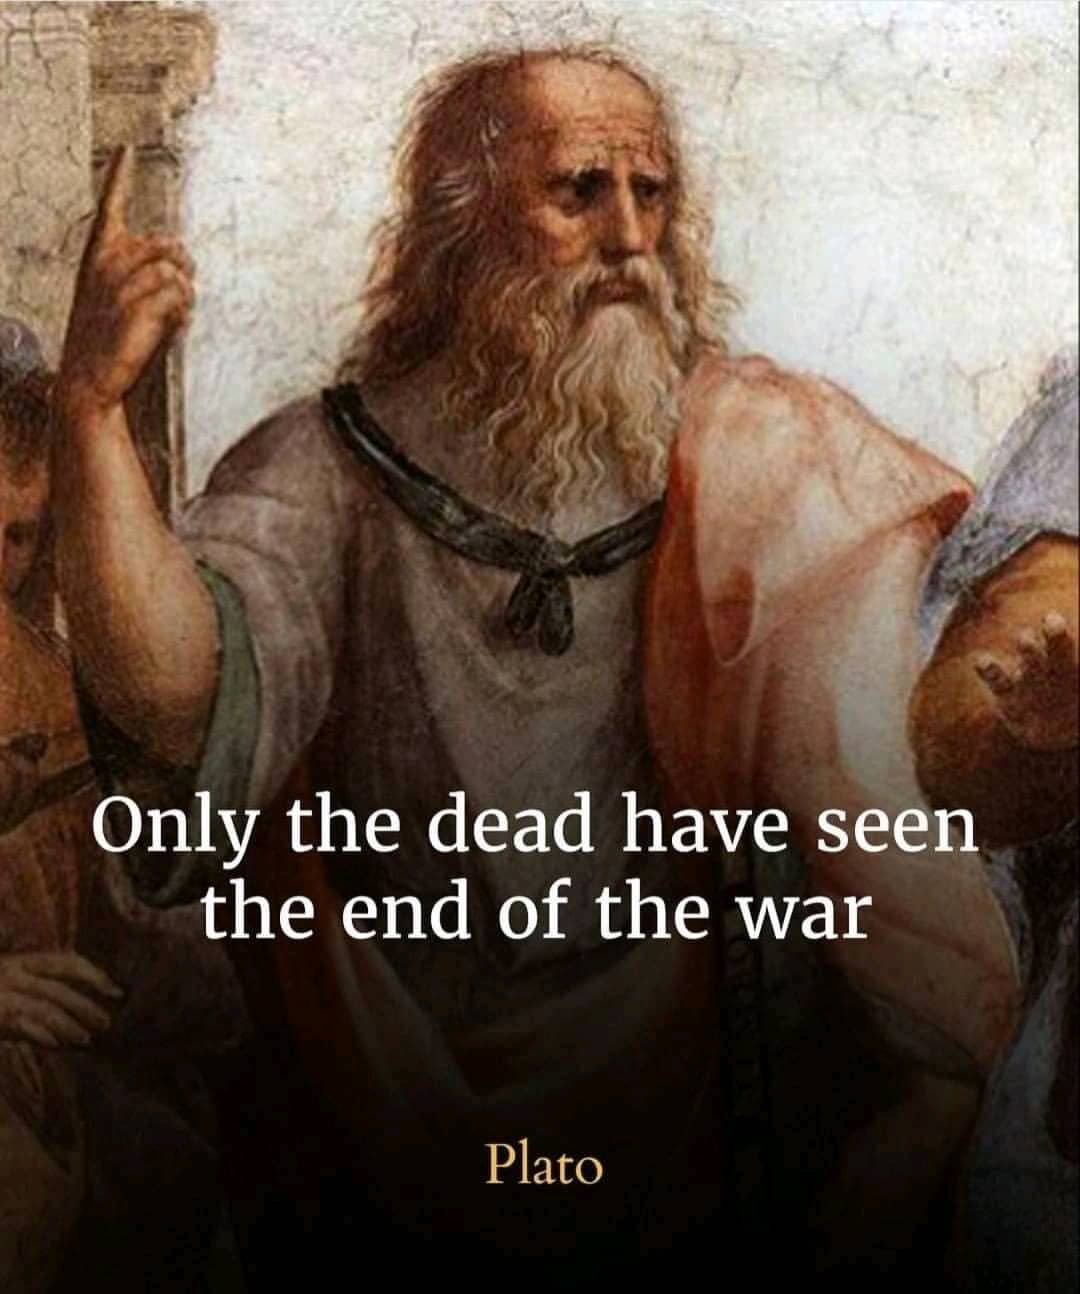 Only the dead have seen the end of the war. Plato.